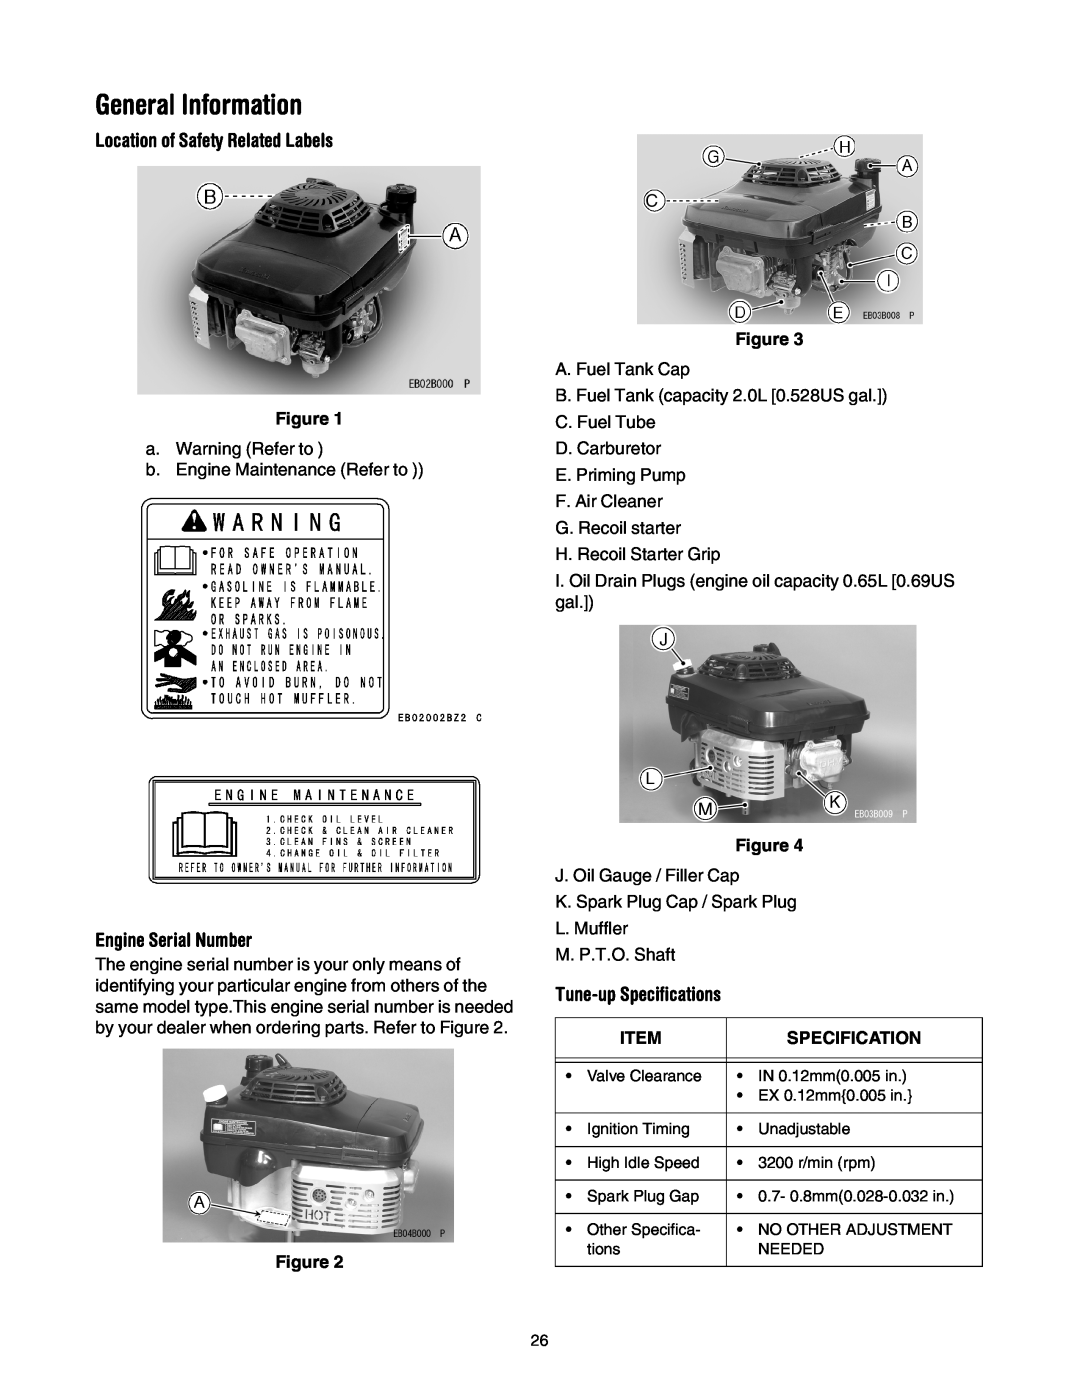 Cub Cadet 977A, E977C General Information, Location of Safety Related Labels, Engine Serial Number, Tune-up Specifications 